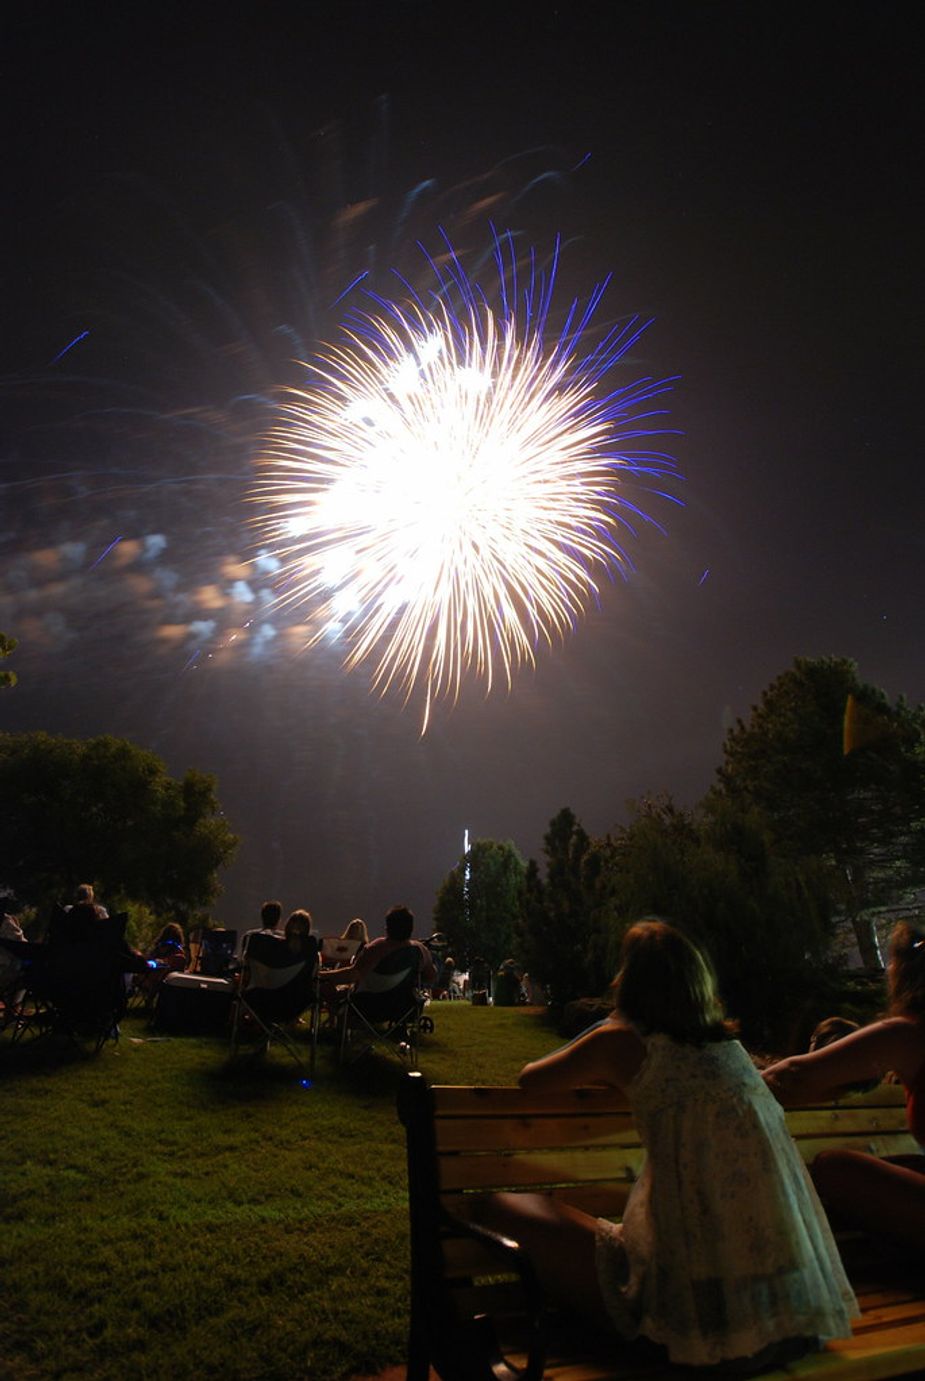 This city's festival lights up the night sky on July 4 each year. Photo by Lisha Newman.